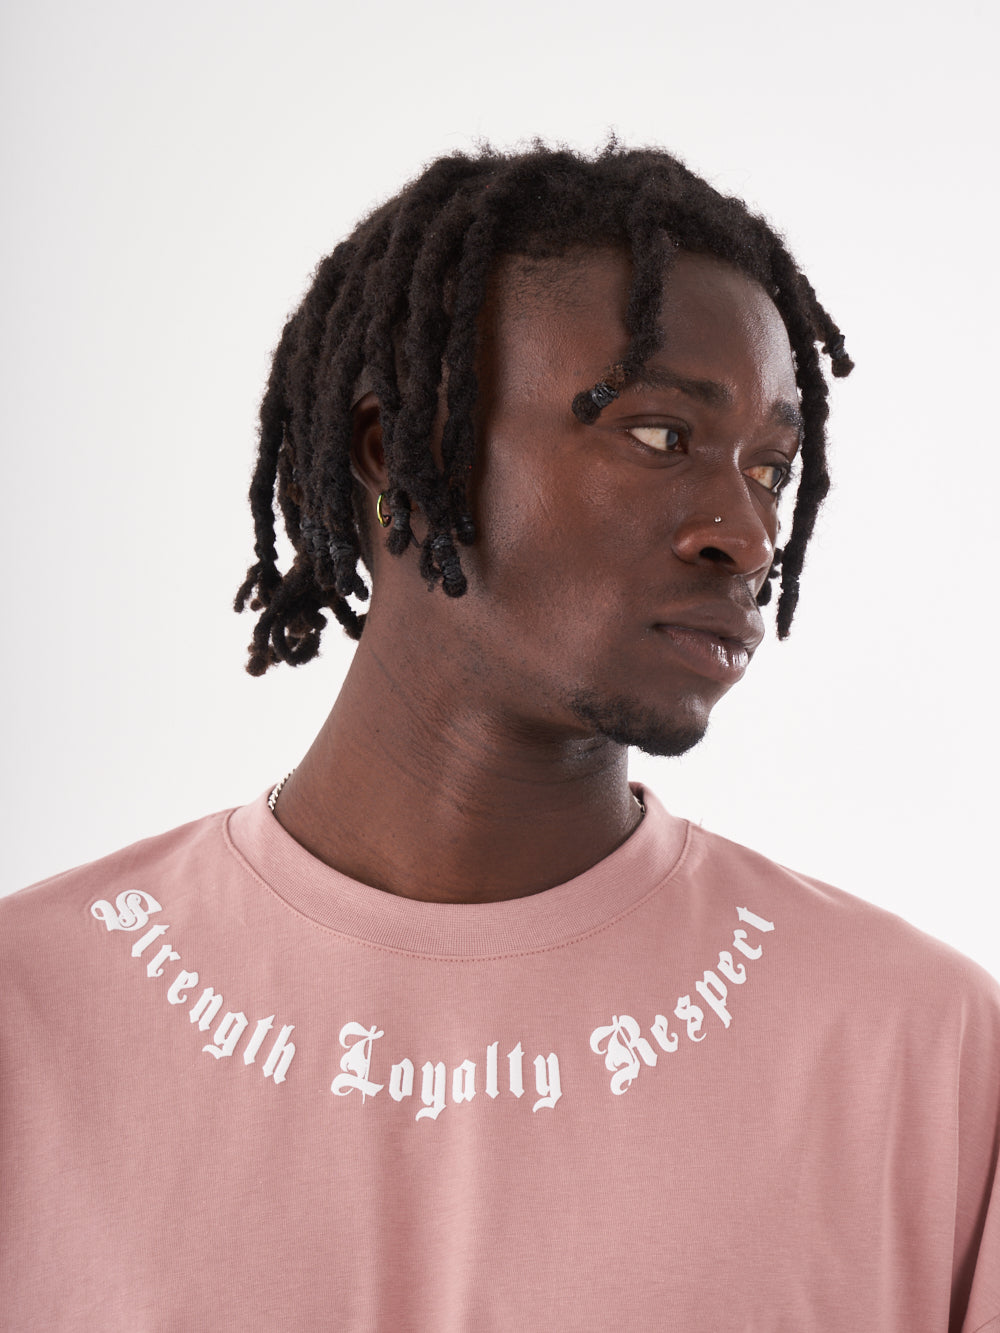 A man with dreadlocks wearing a pink CREED T-SHIRT that says strength loyalty respect.